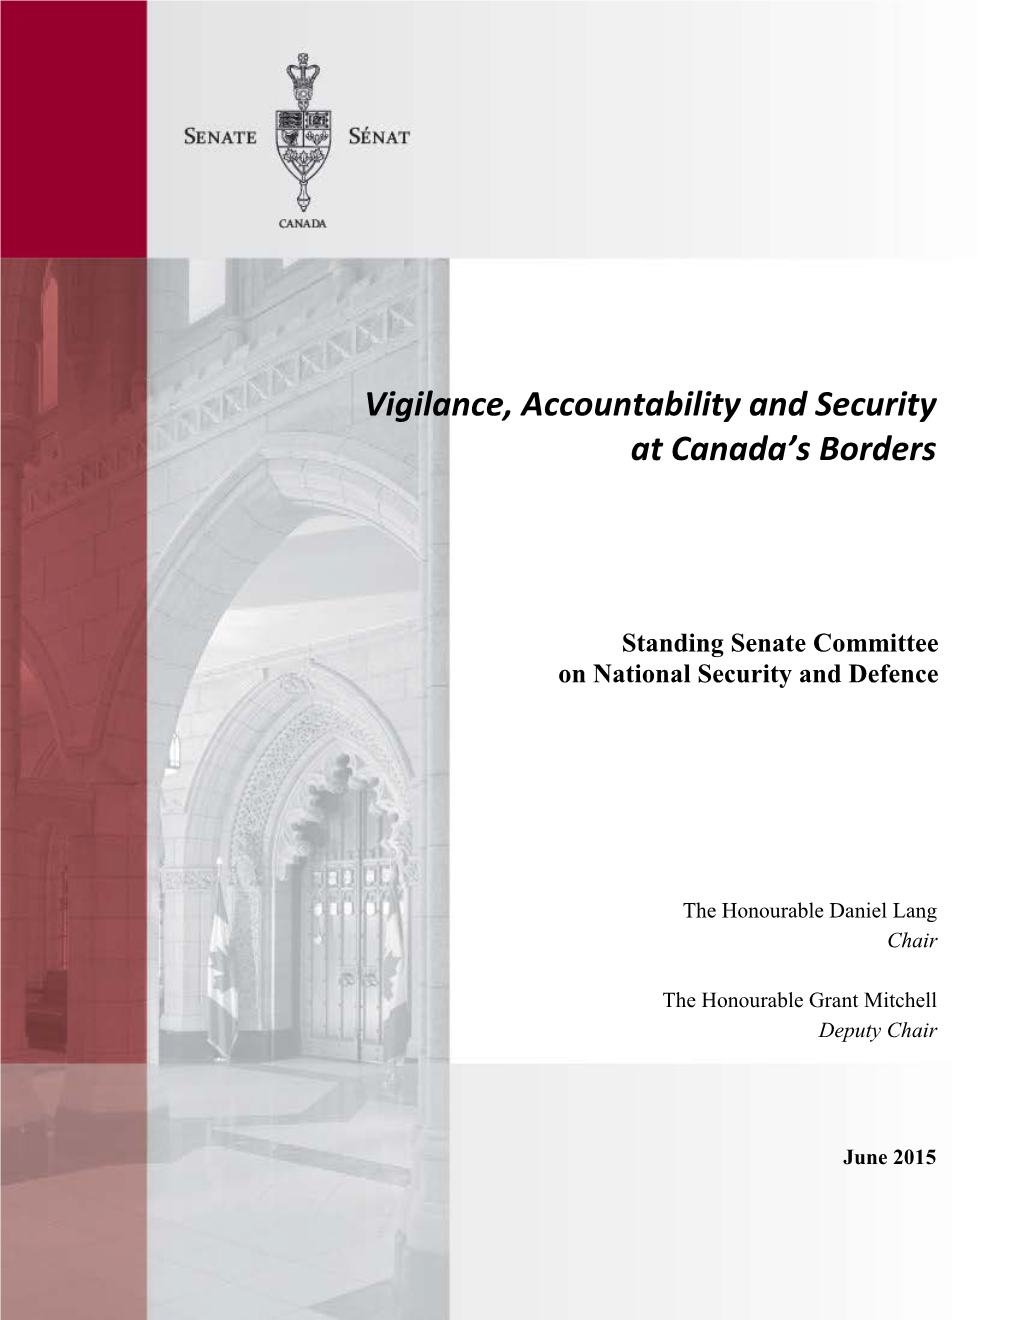 Vigilance, Accountability and Security at Canada's Borders